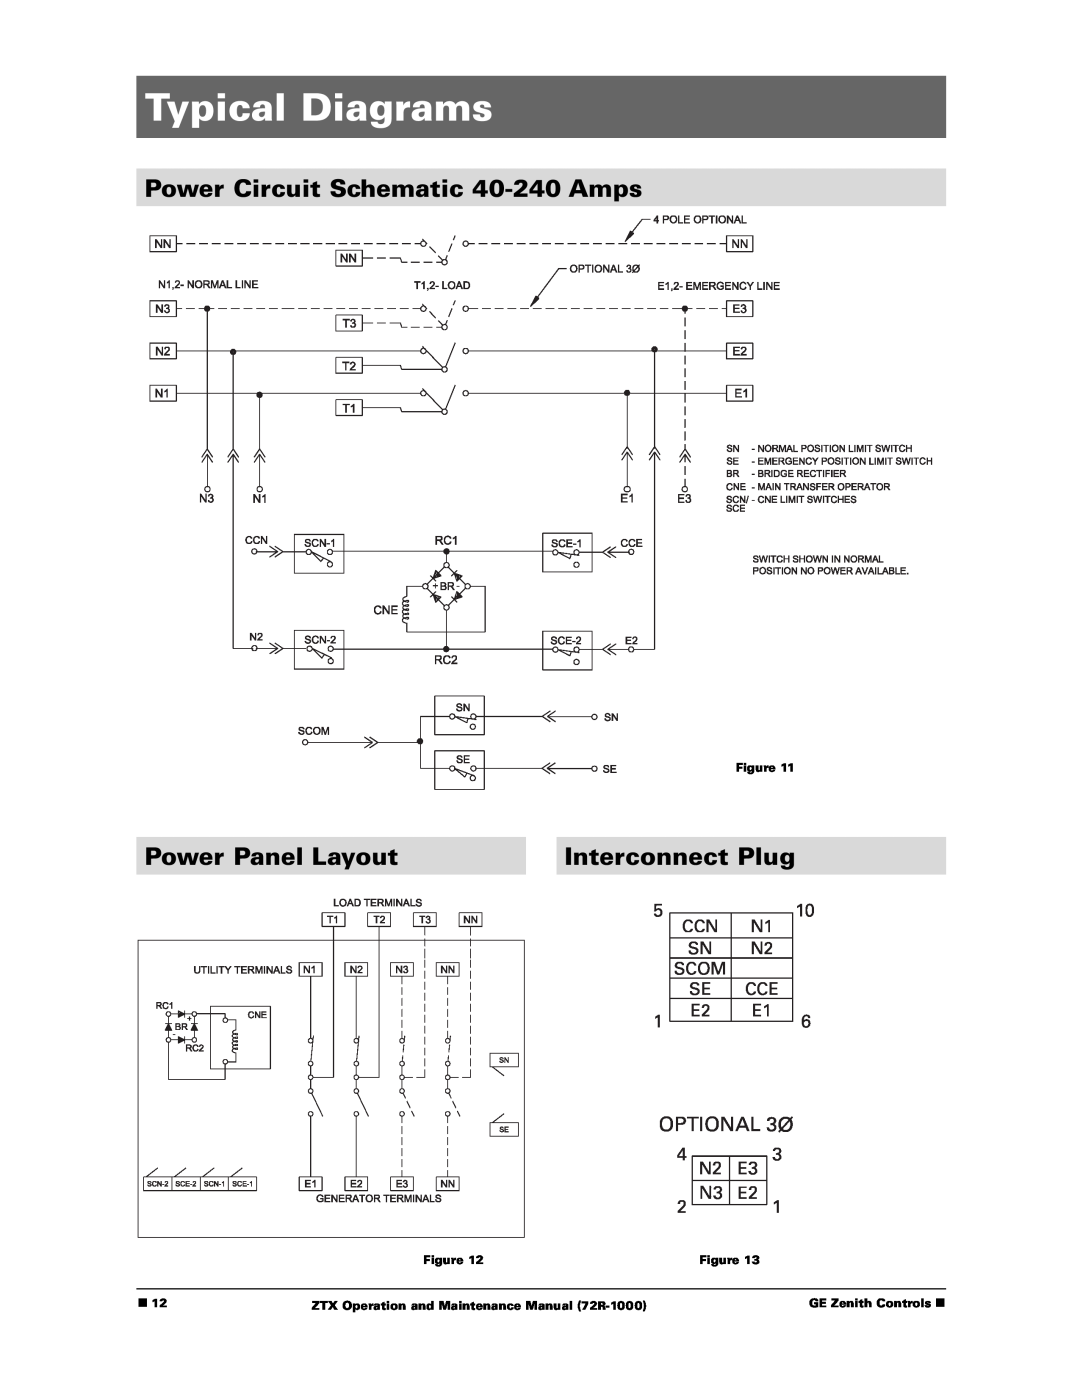 GE ZTX manual Typical Diagrams, Power Circuit Schematic 40-240Amps, Power Panel Layout, Interconnect Plug, Optional, Scom 